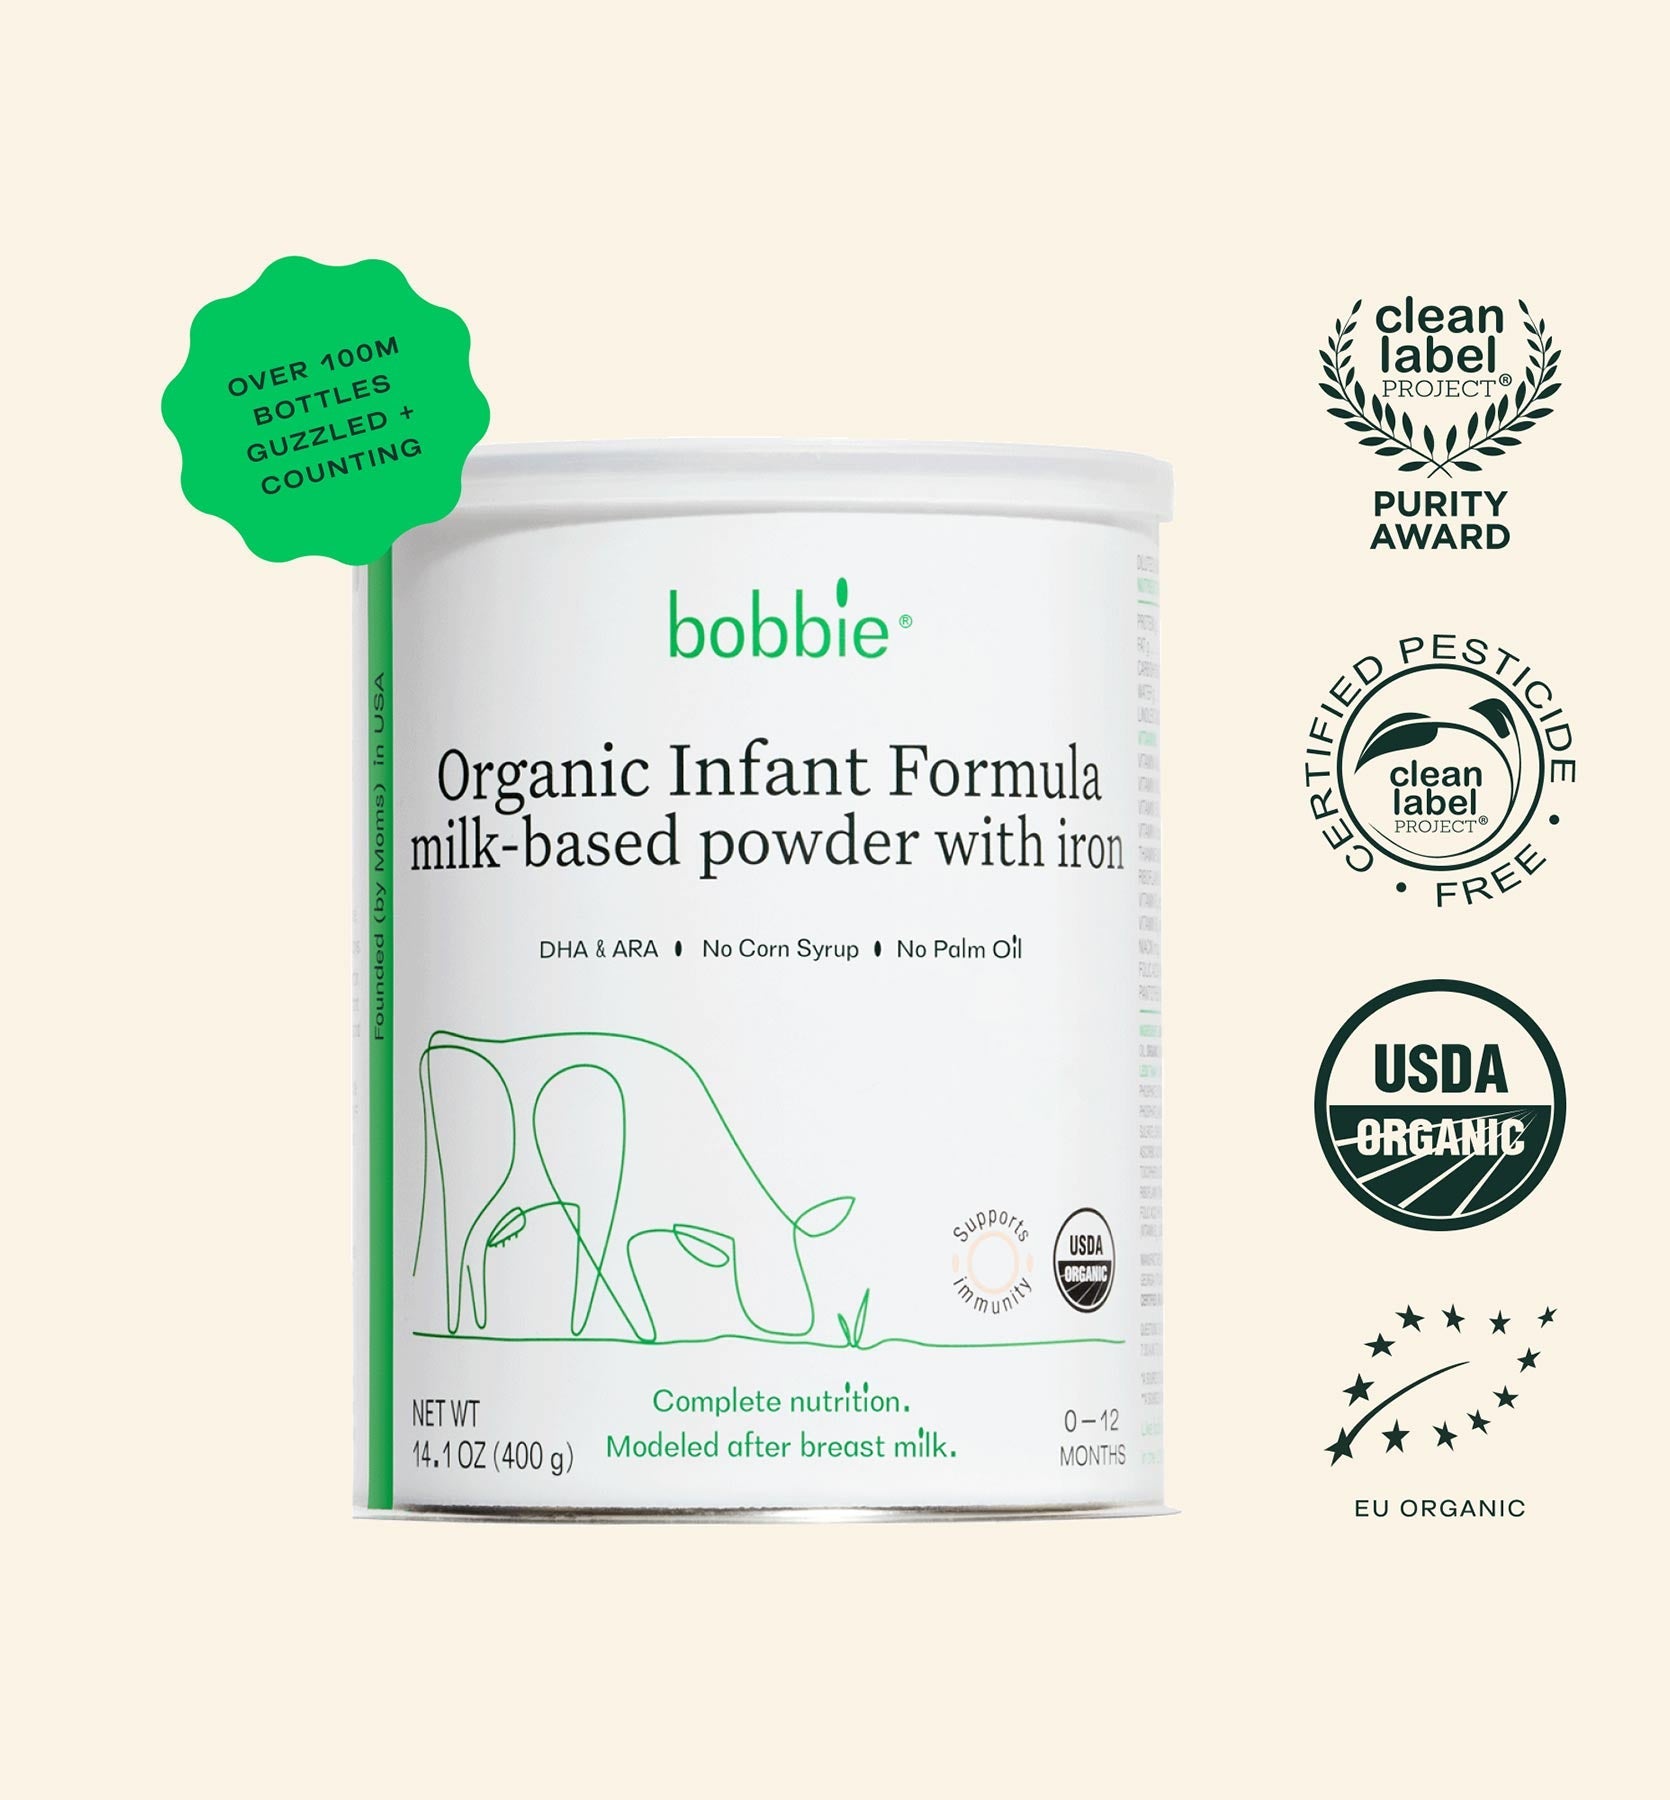 Can of Bobbie Infant Formula with Clean Label Purity and Pesticide Free Badges, as well as USDA and EU Organic labels.